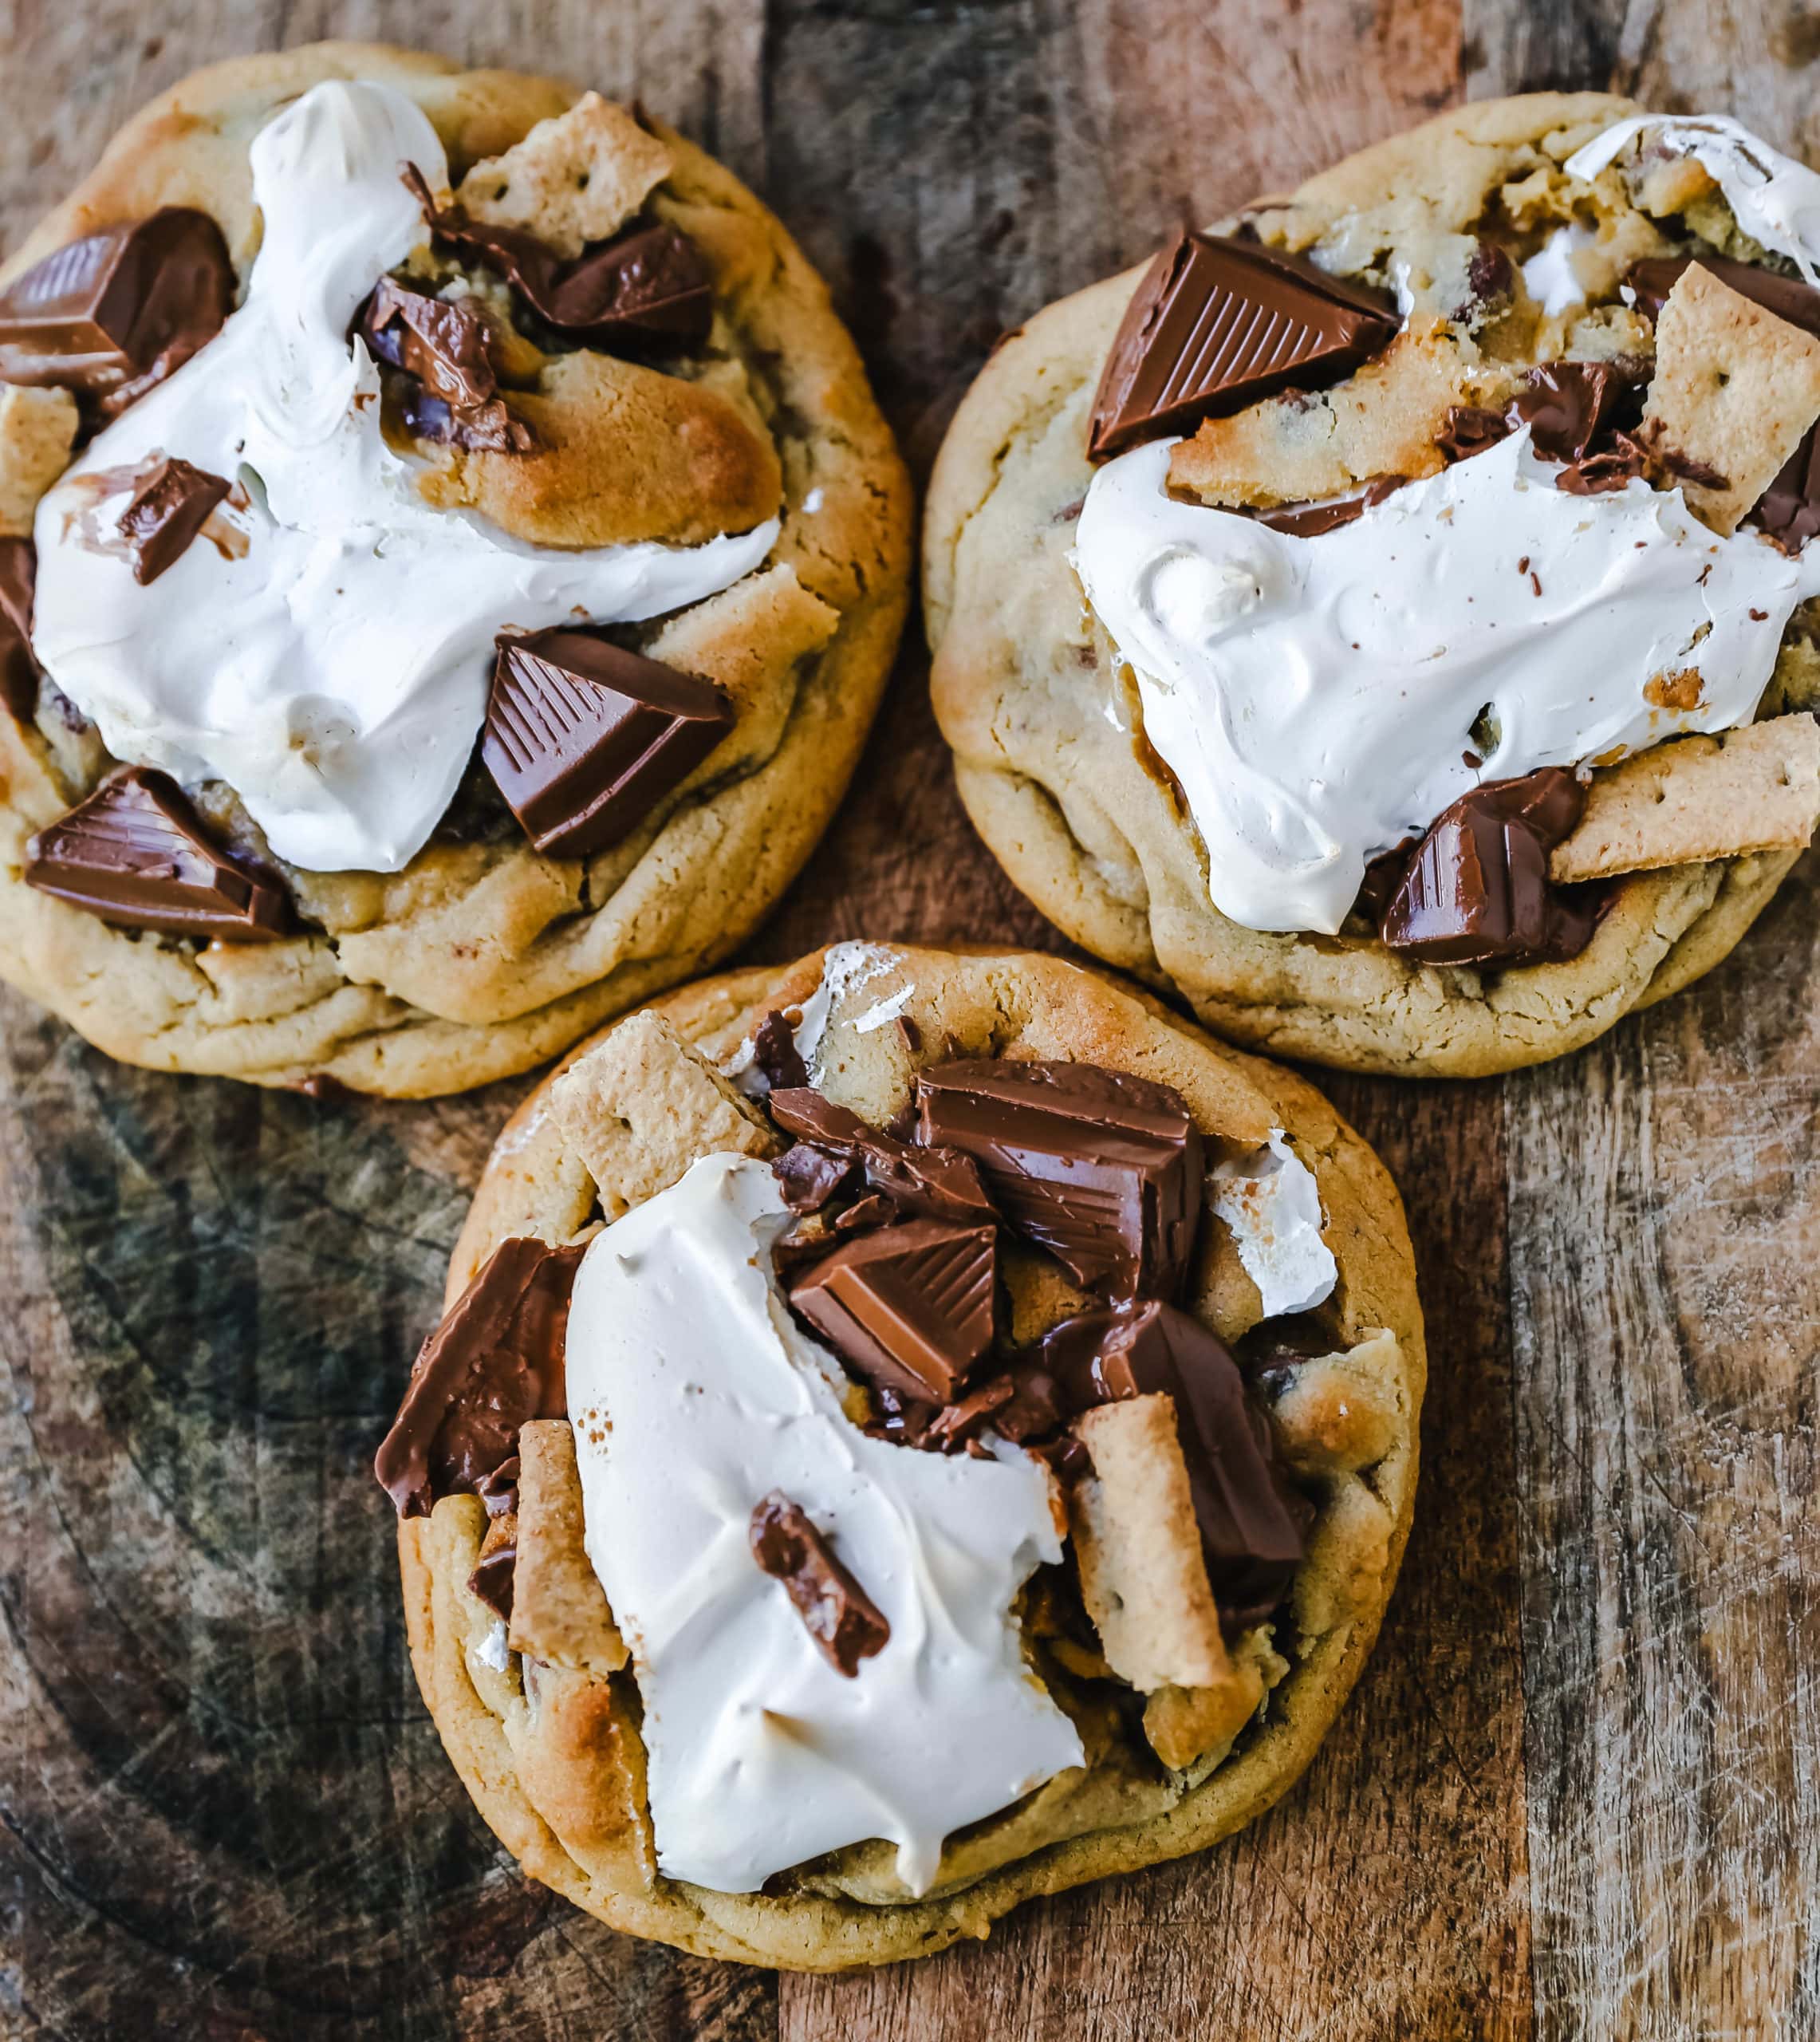 https://www.modernhoney.com/wp-content/uploads/2020/06/Chocolate-Chip-Smores-Cookies-17-scaled.jpg